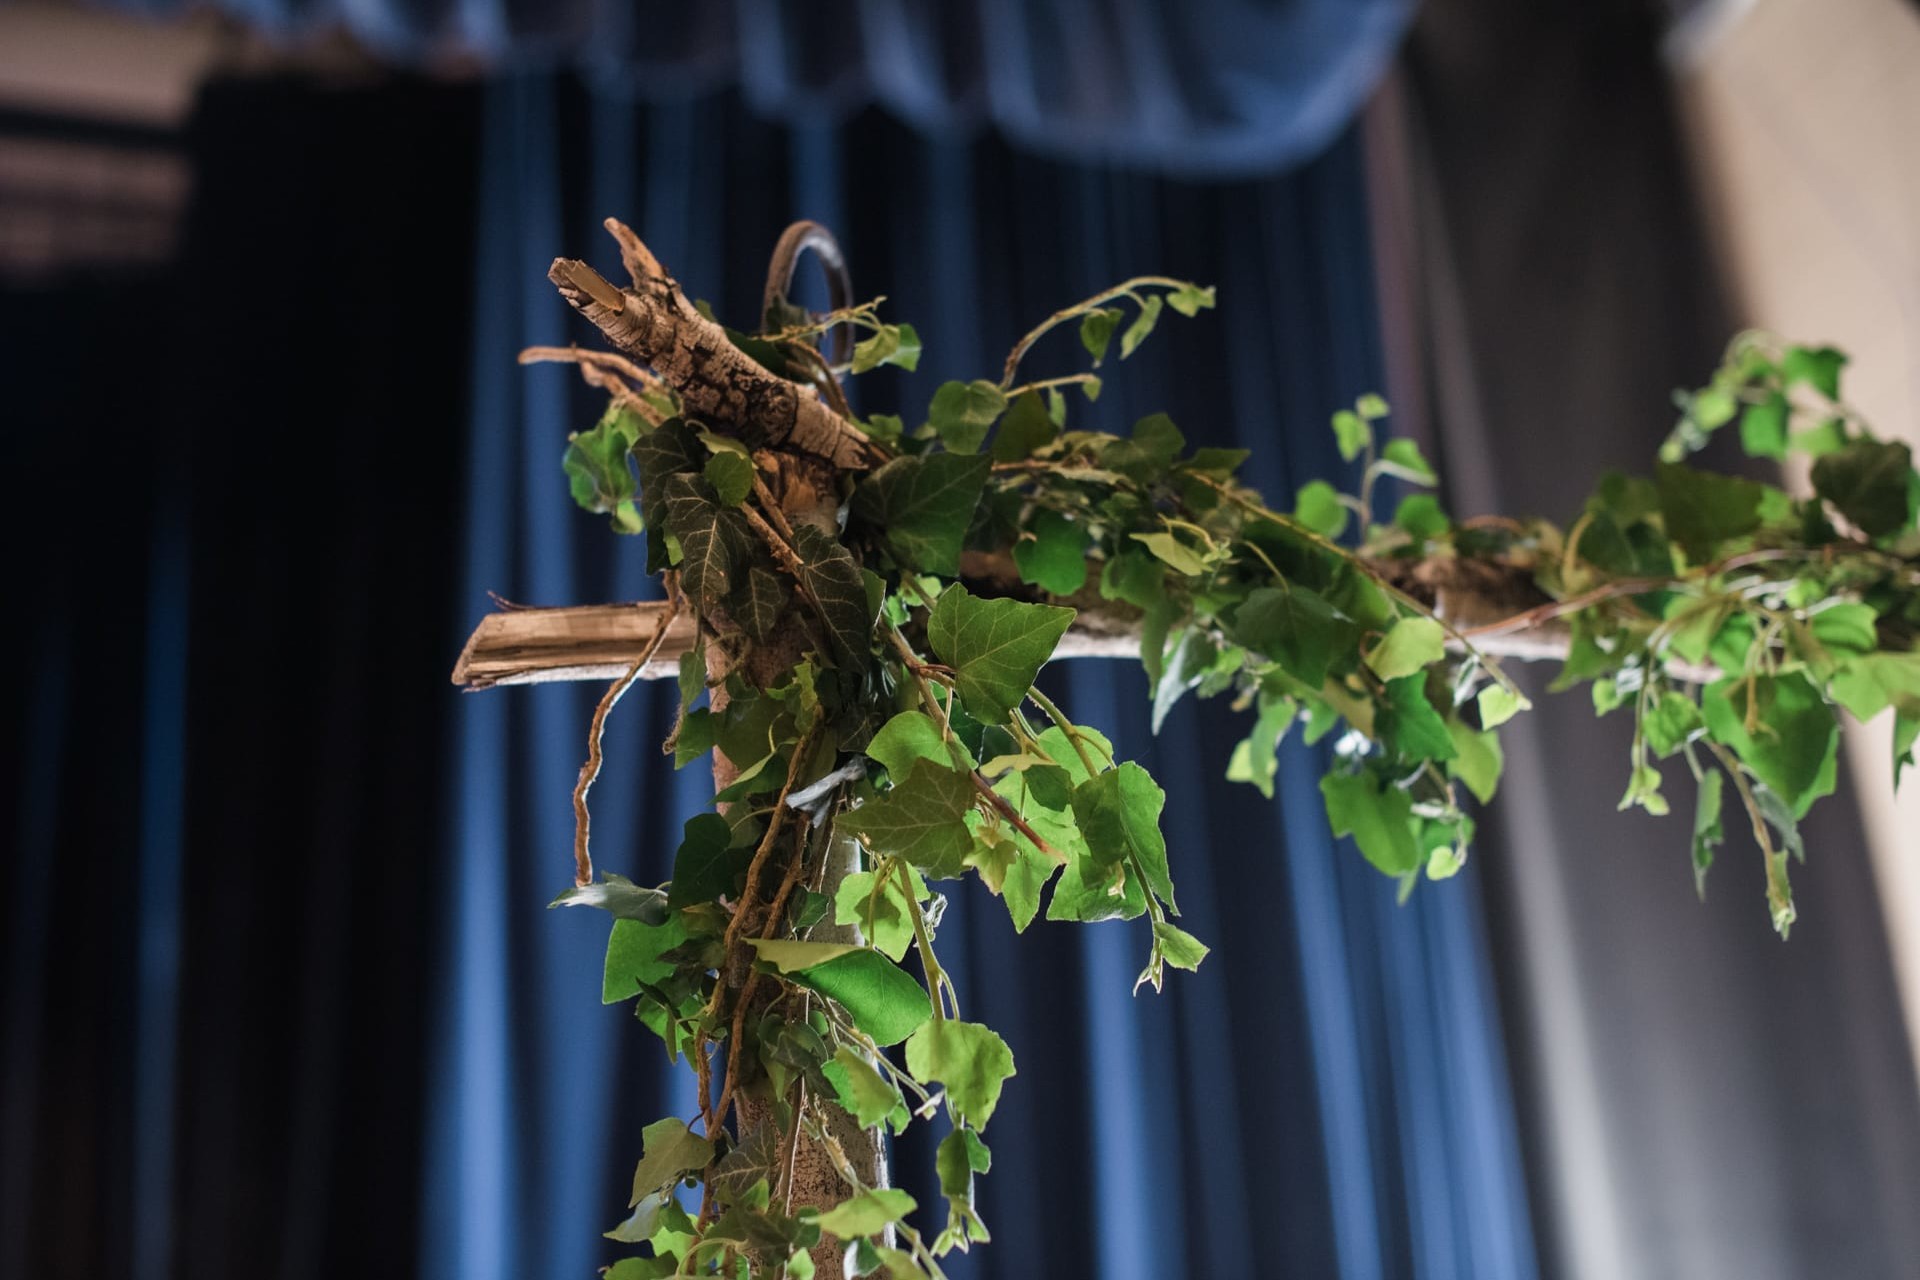 upclose of Denver Waldorf School Graduation Arch with branches and leaves